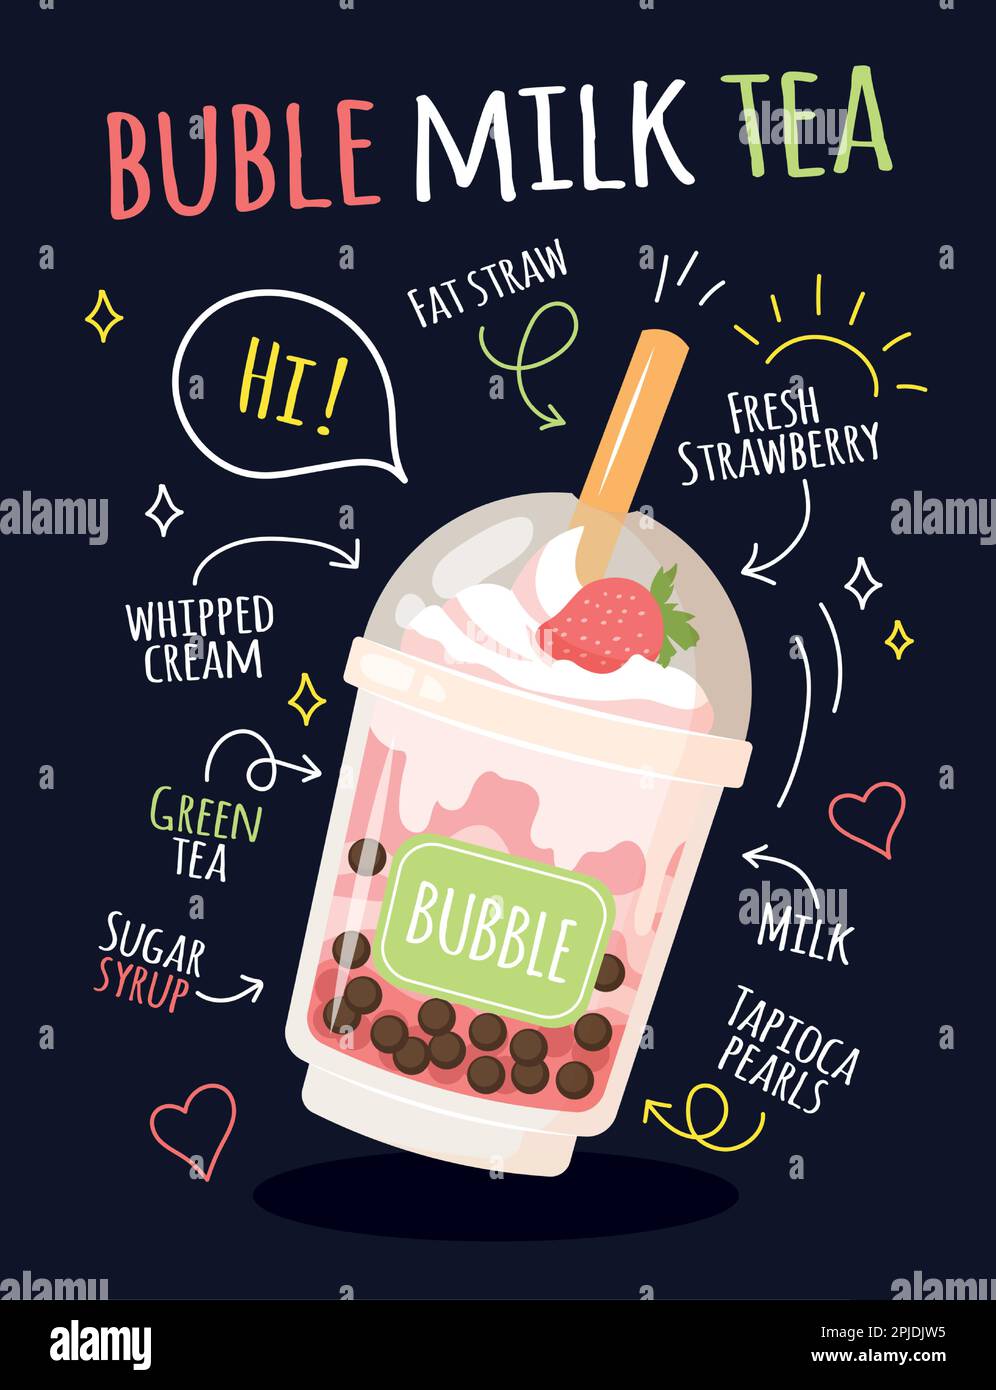 https://c8.alamy.com/comp/2PJDJW5/bubble-tea-and-coffee-typography-menu-banner-with-slogans-ice-milk-drink-glass-cute-cup-for-funny-fashion-girl-summer-hipster-print-tasty-beverage-ingredients-vector-graphic-design-with-text-2PJDJW5.jpg